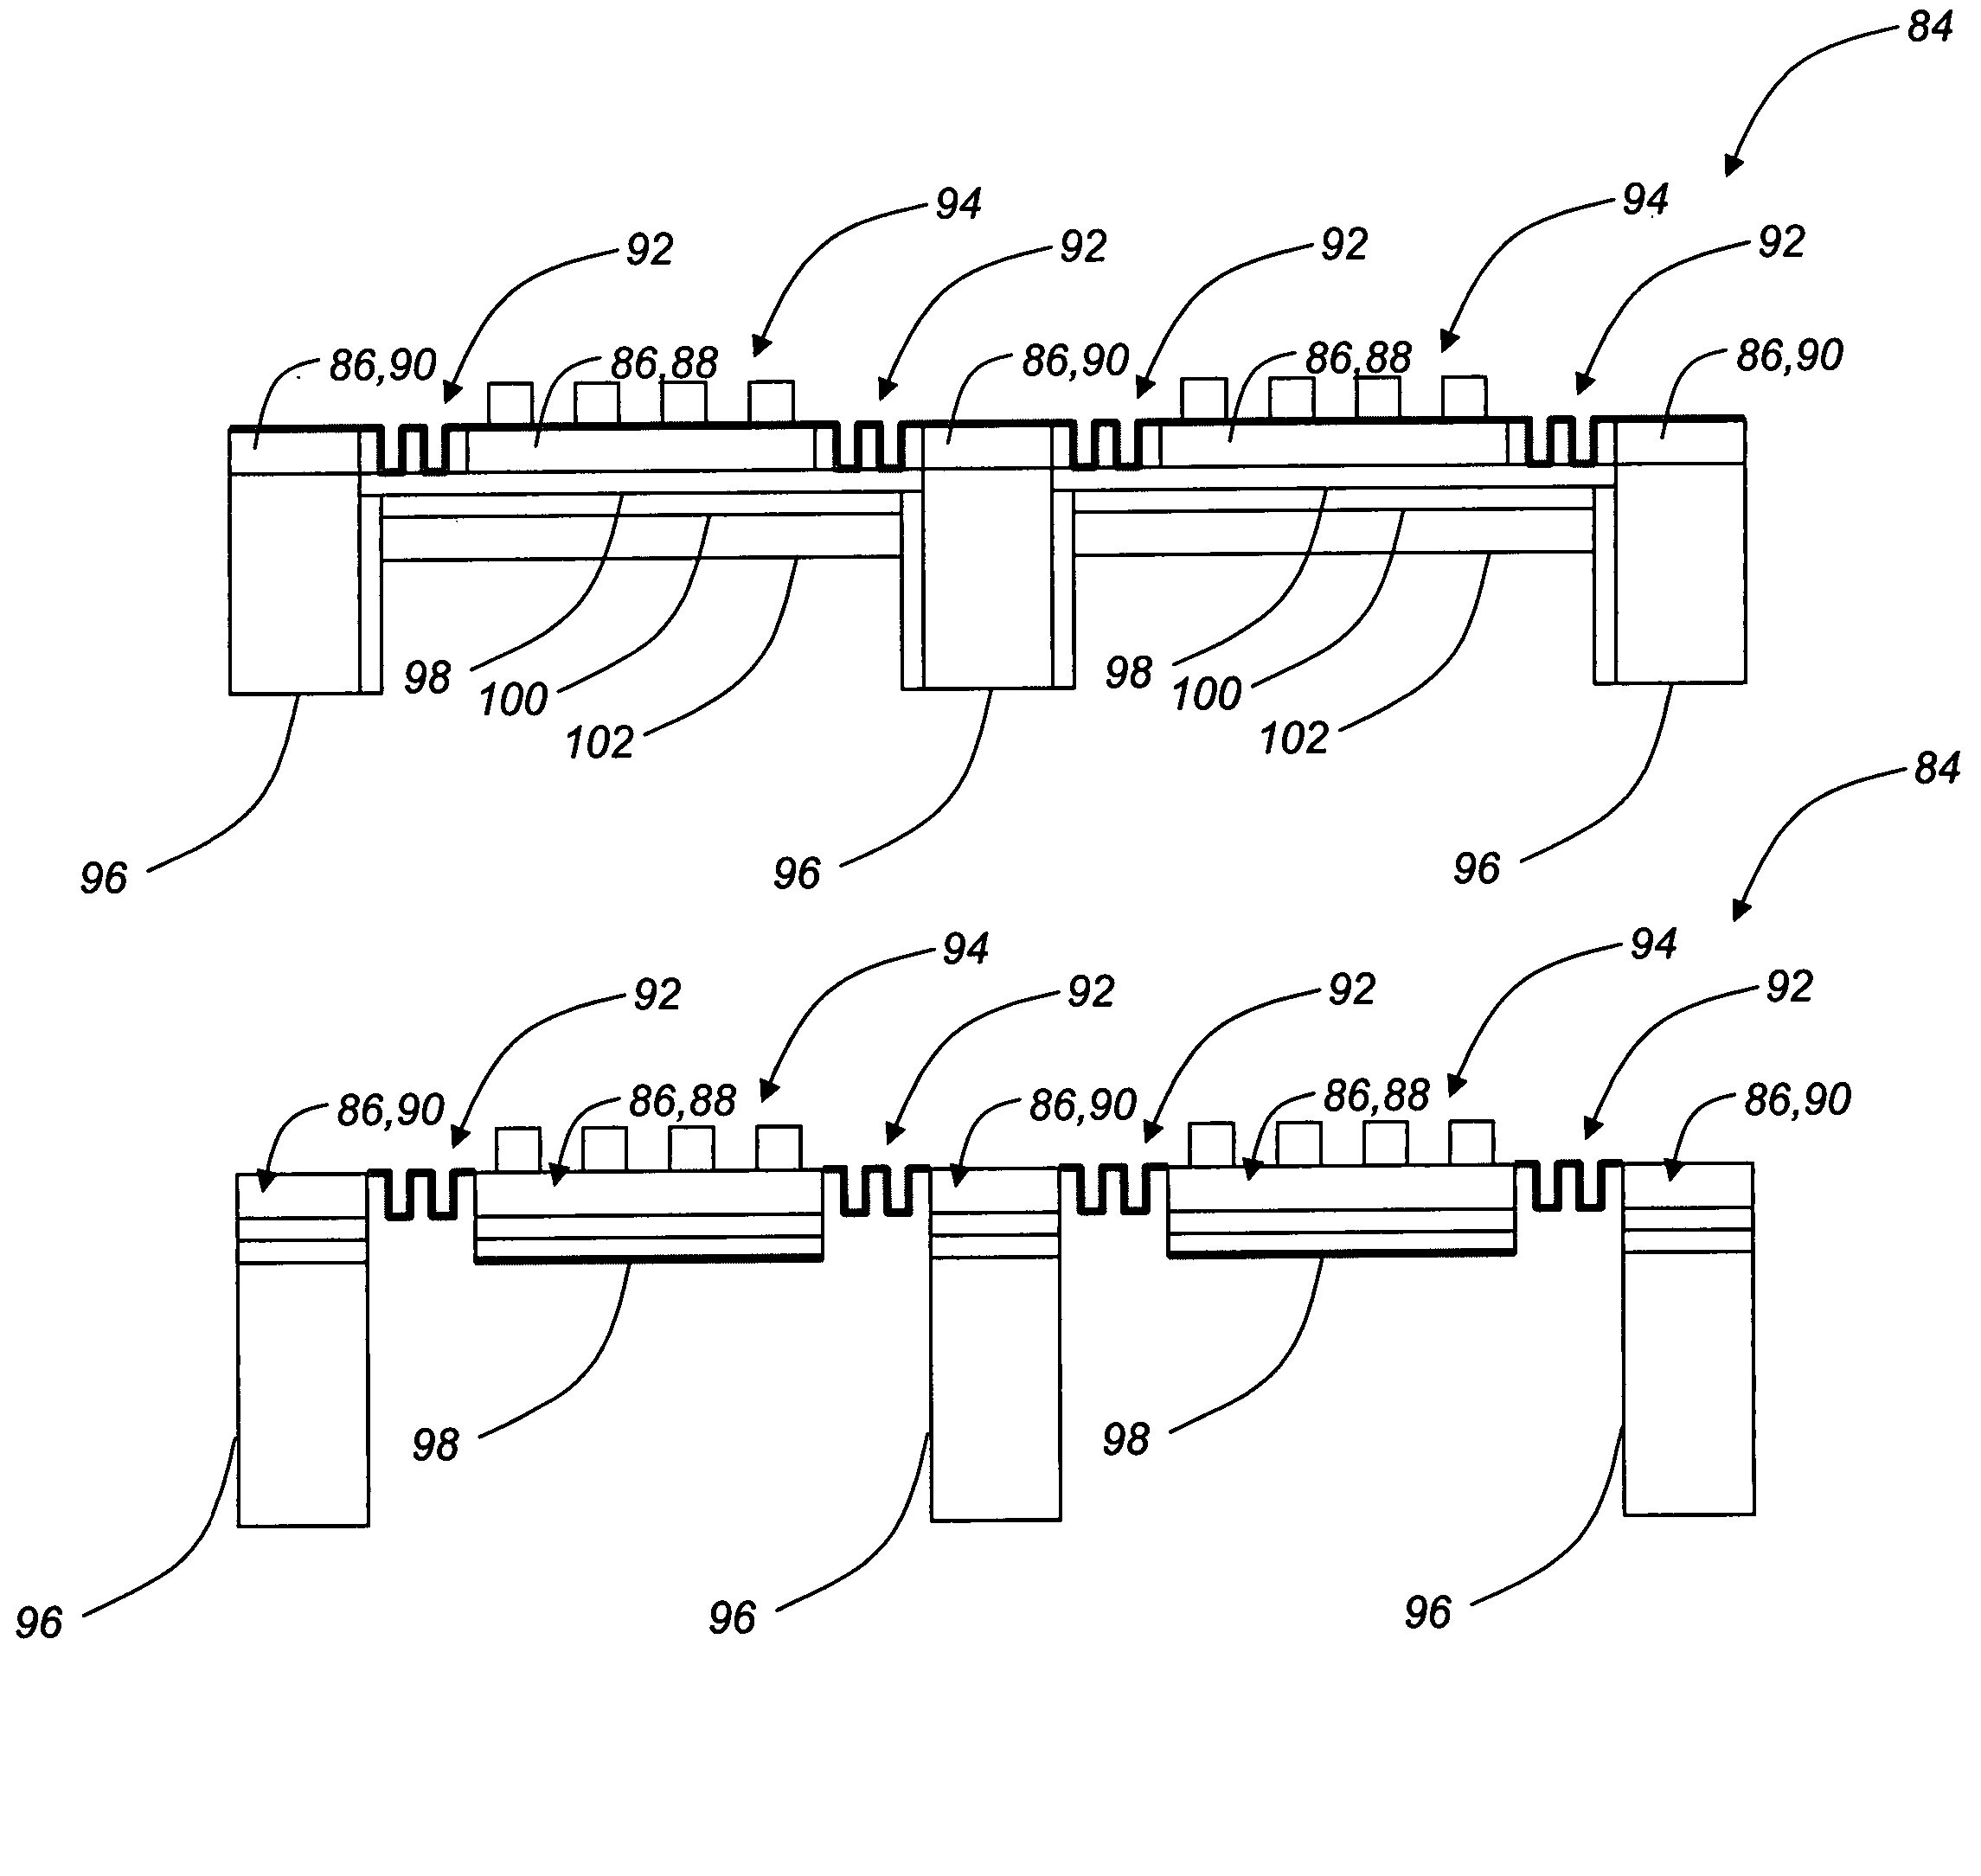 Miniaturized multi-gas and vapor sensor devices and associated methods of fabrication